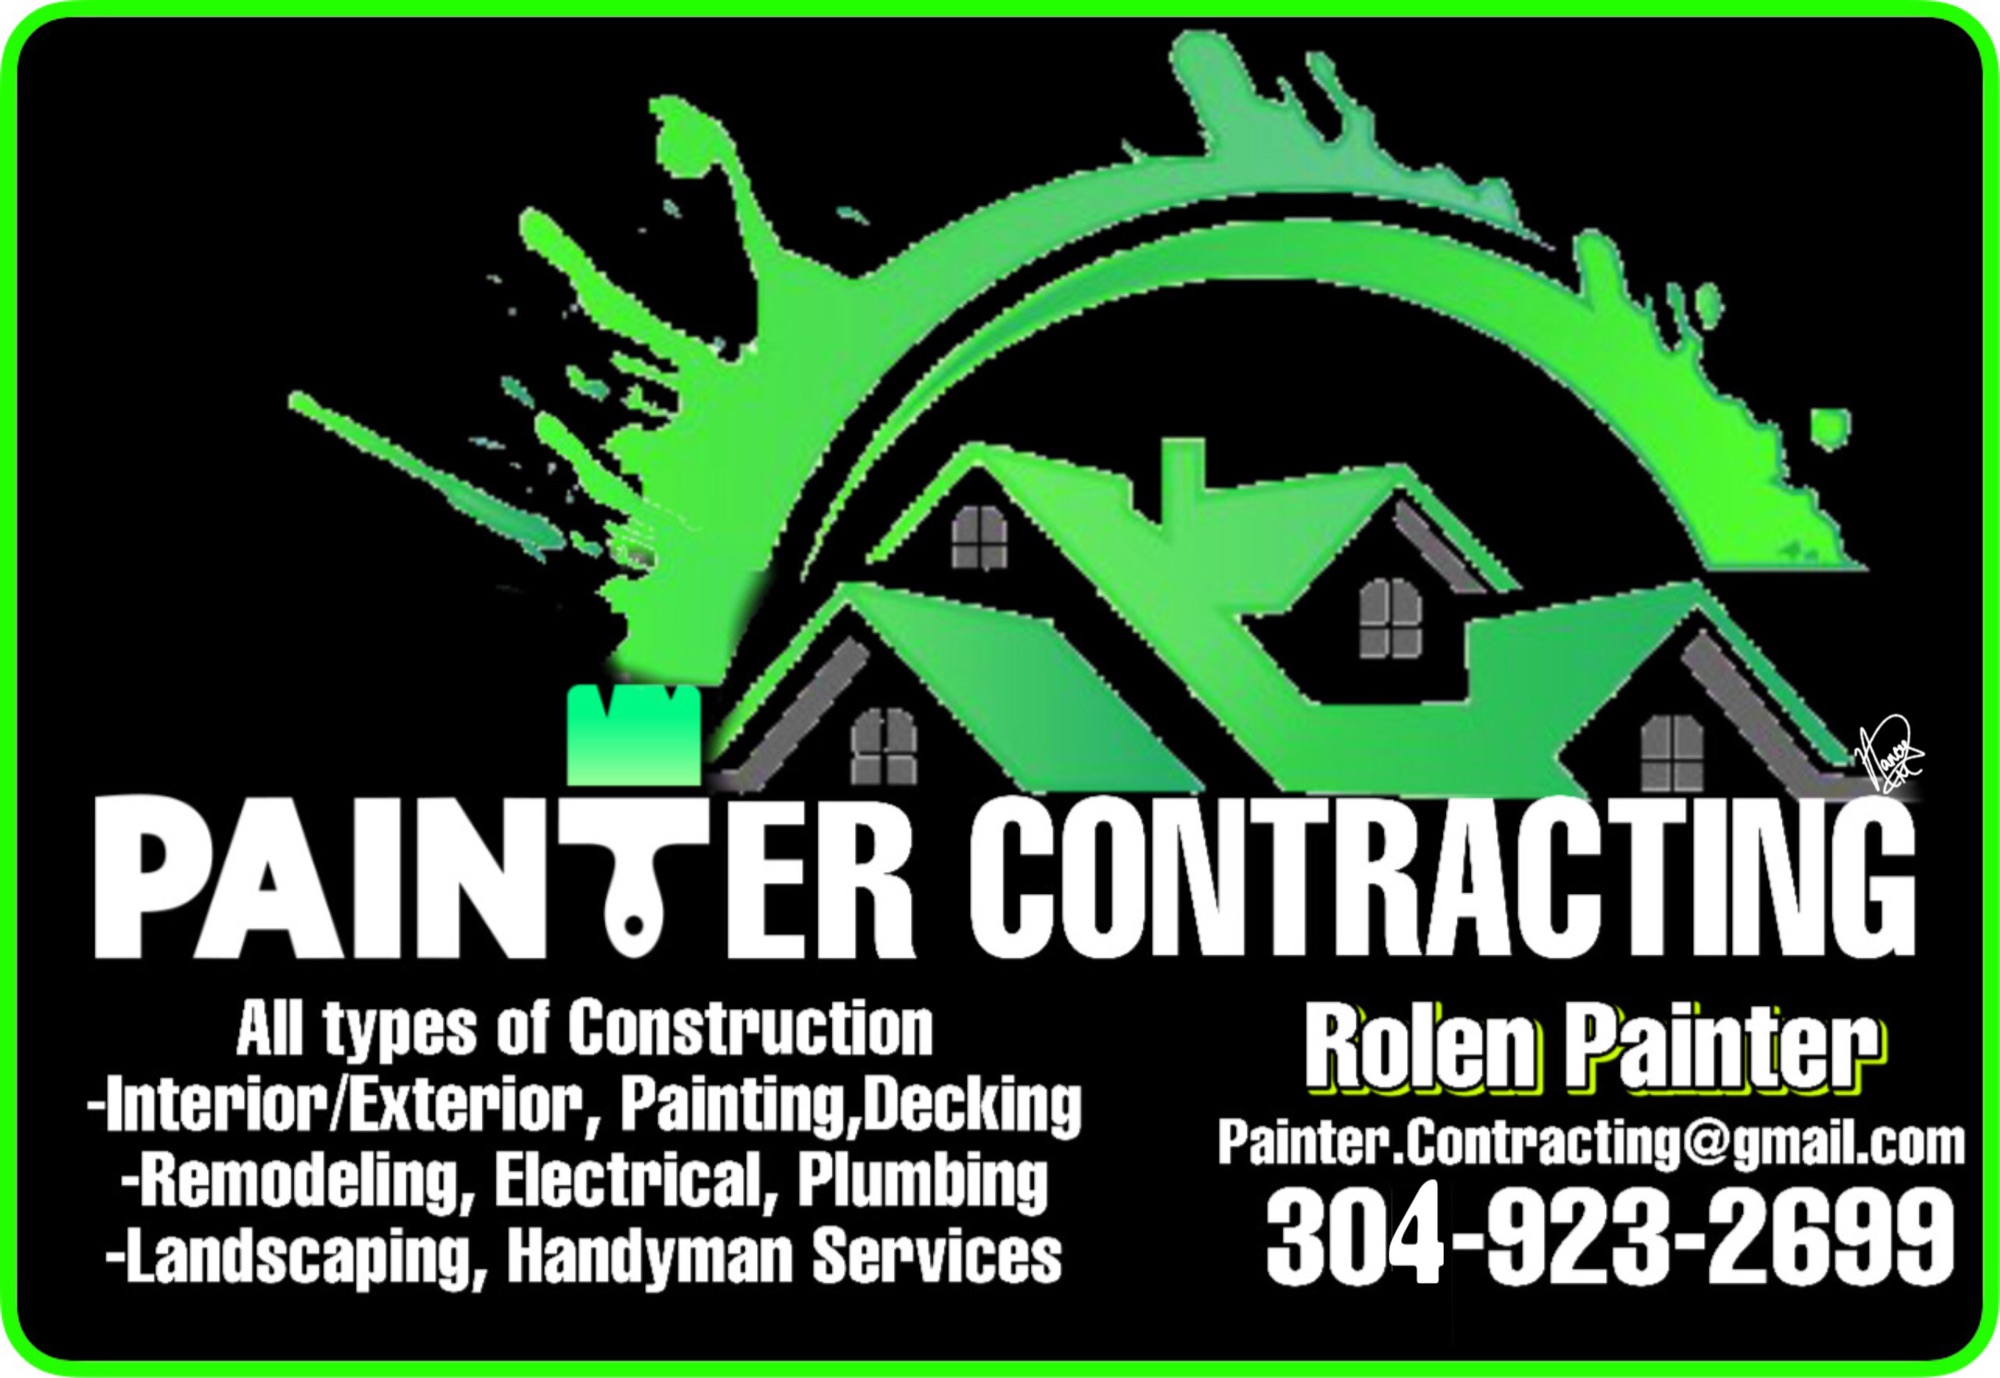 Painter Contracting Logo